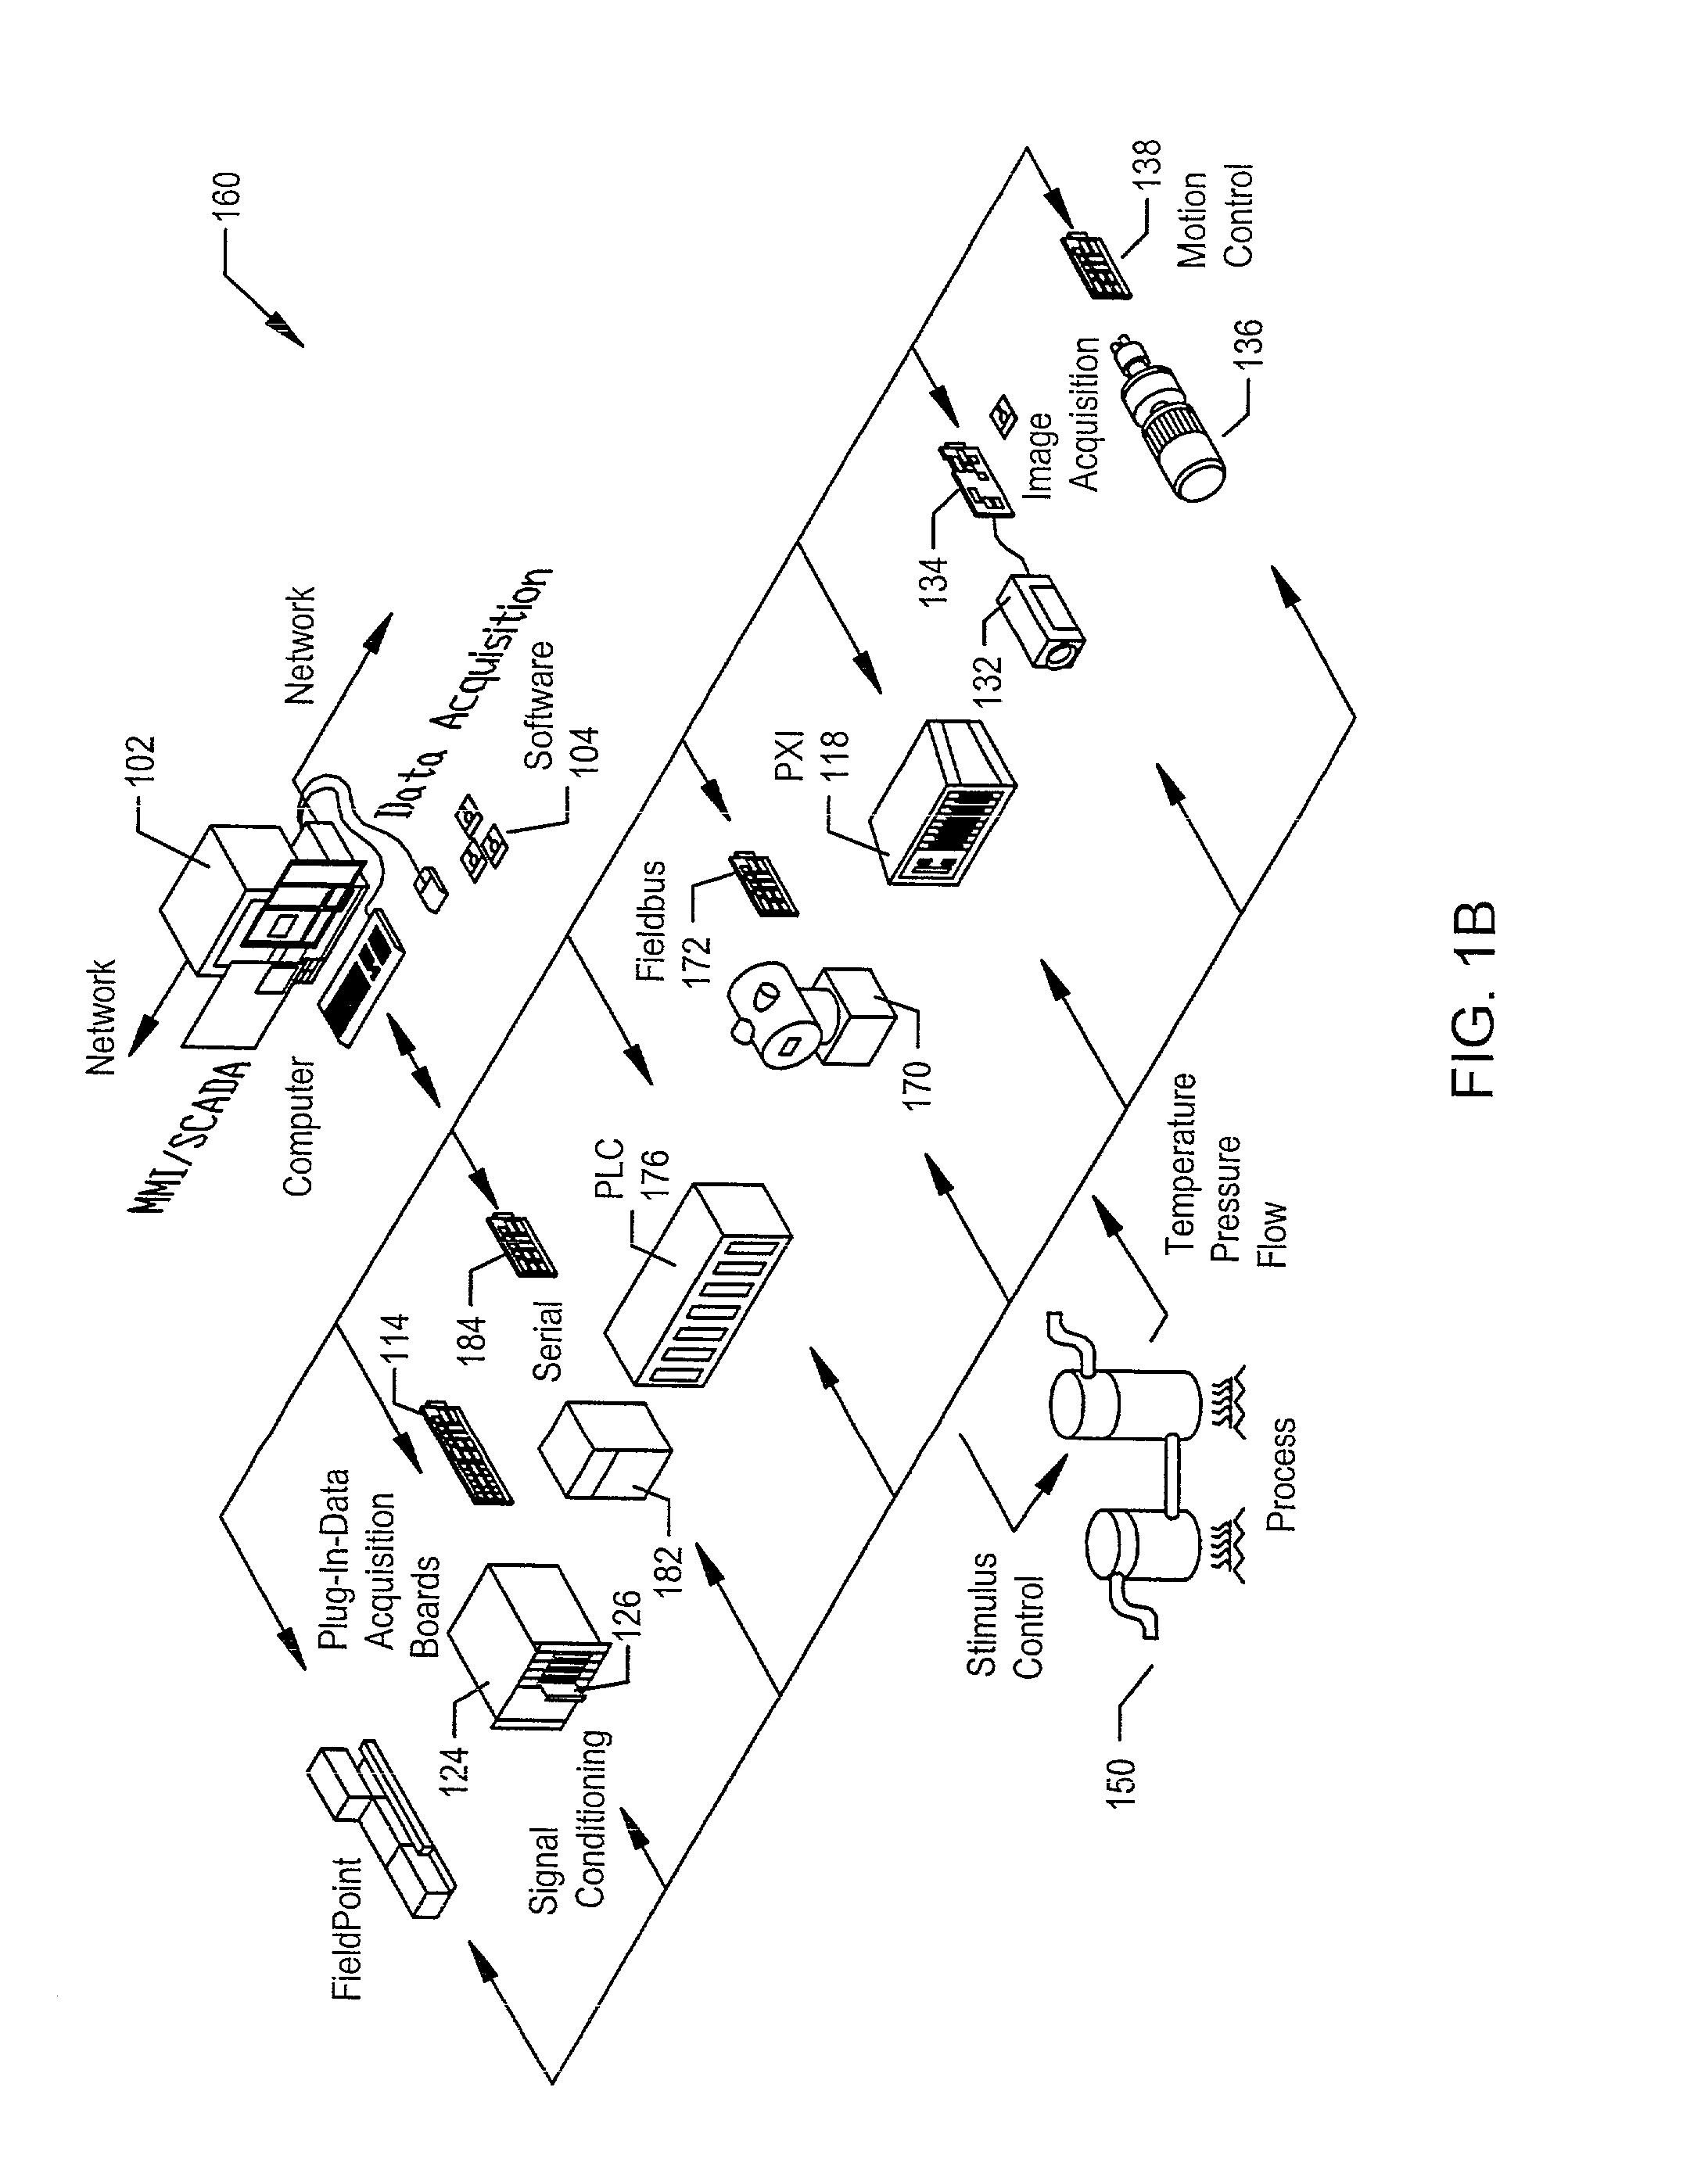 System of measurements experts and method for generating high-performance measurements software drivers